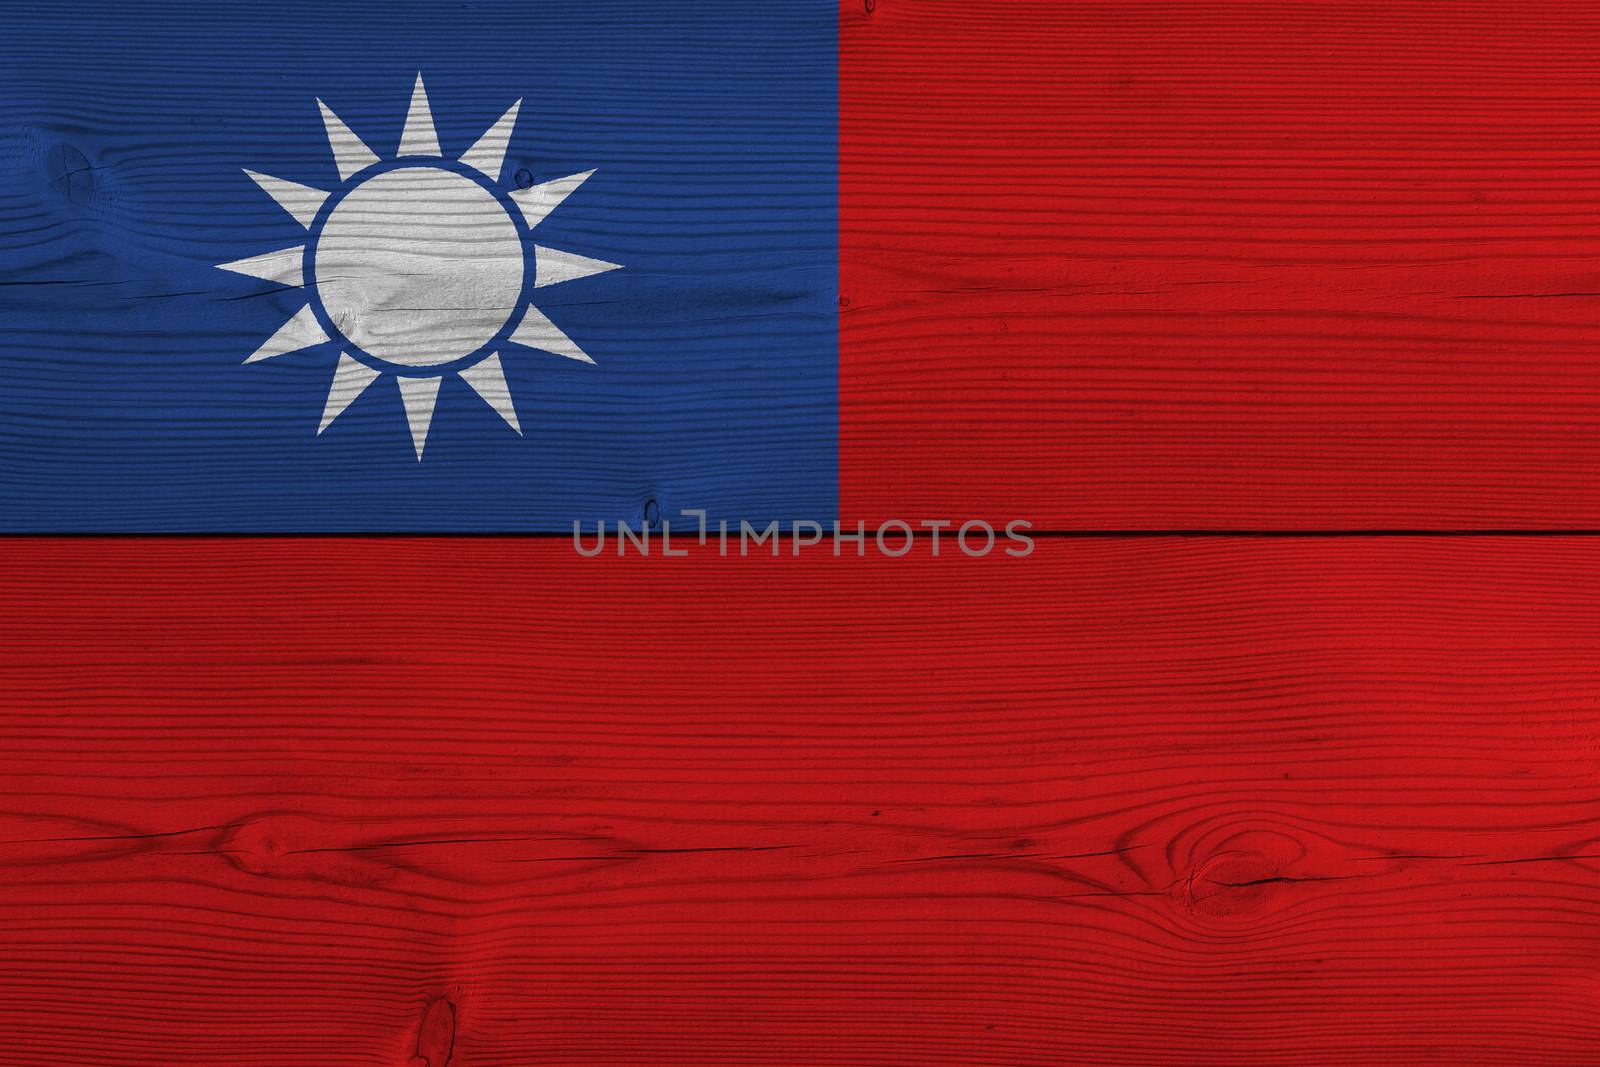 Taiwan flag painted on old wood plank. Patriotic background. National flag of Taiwan